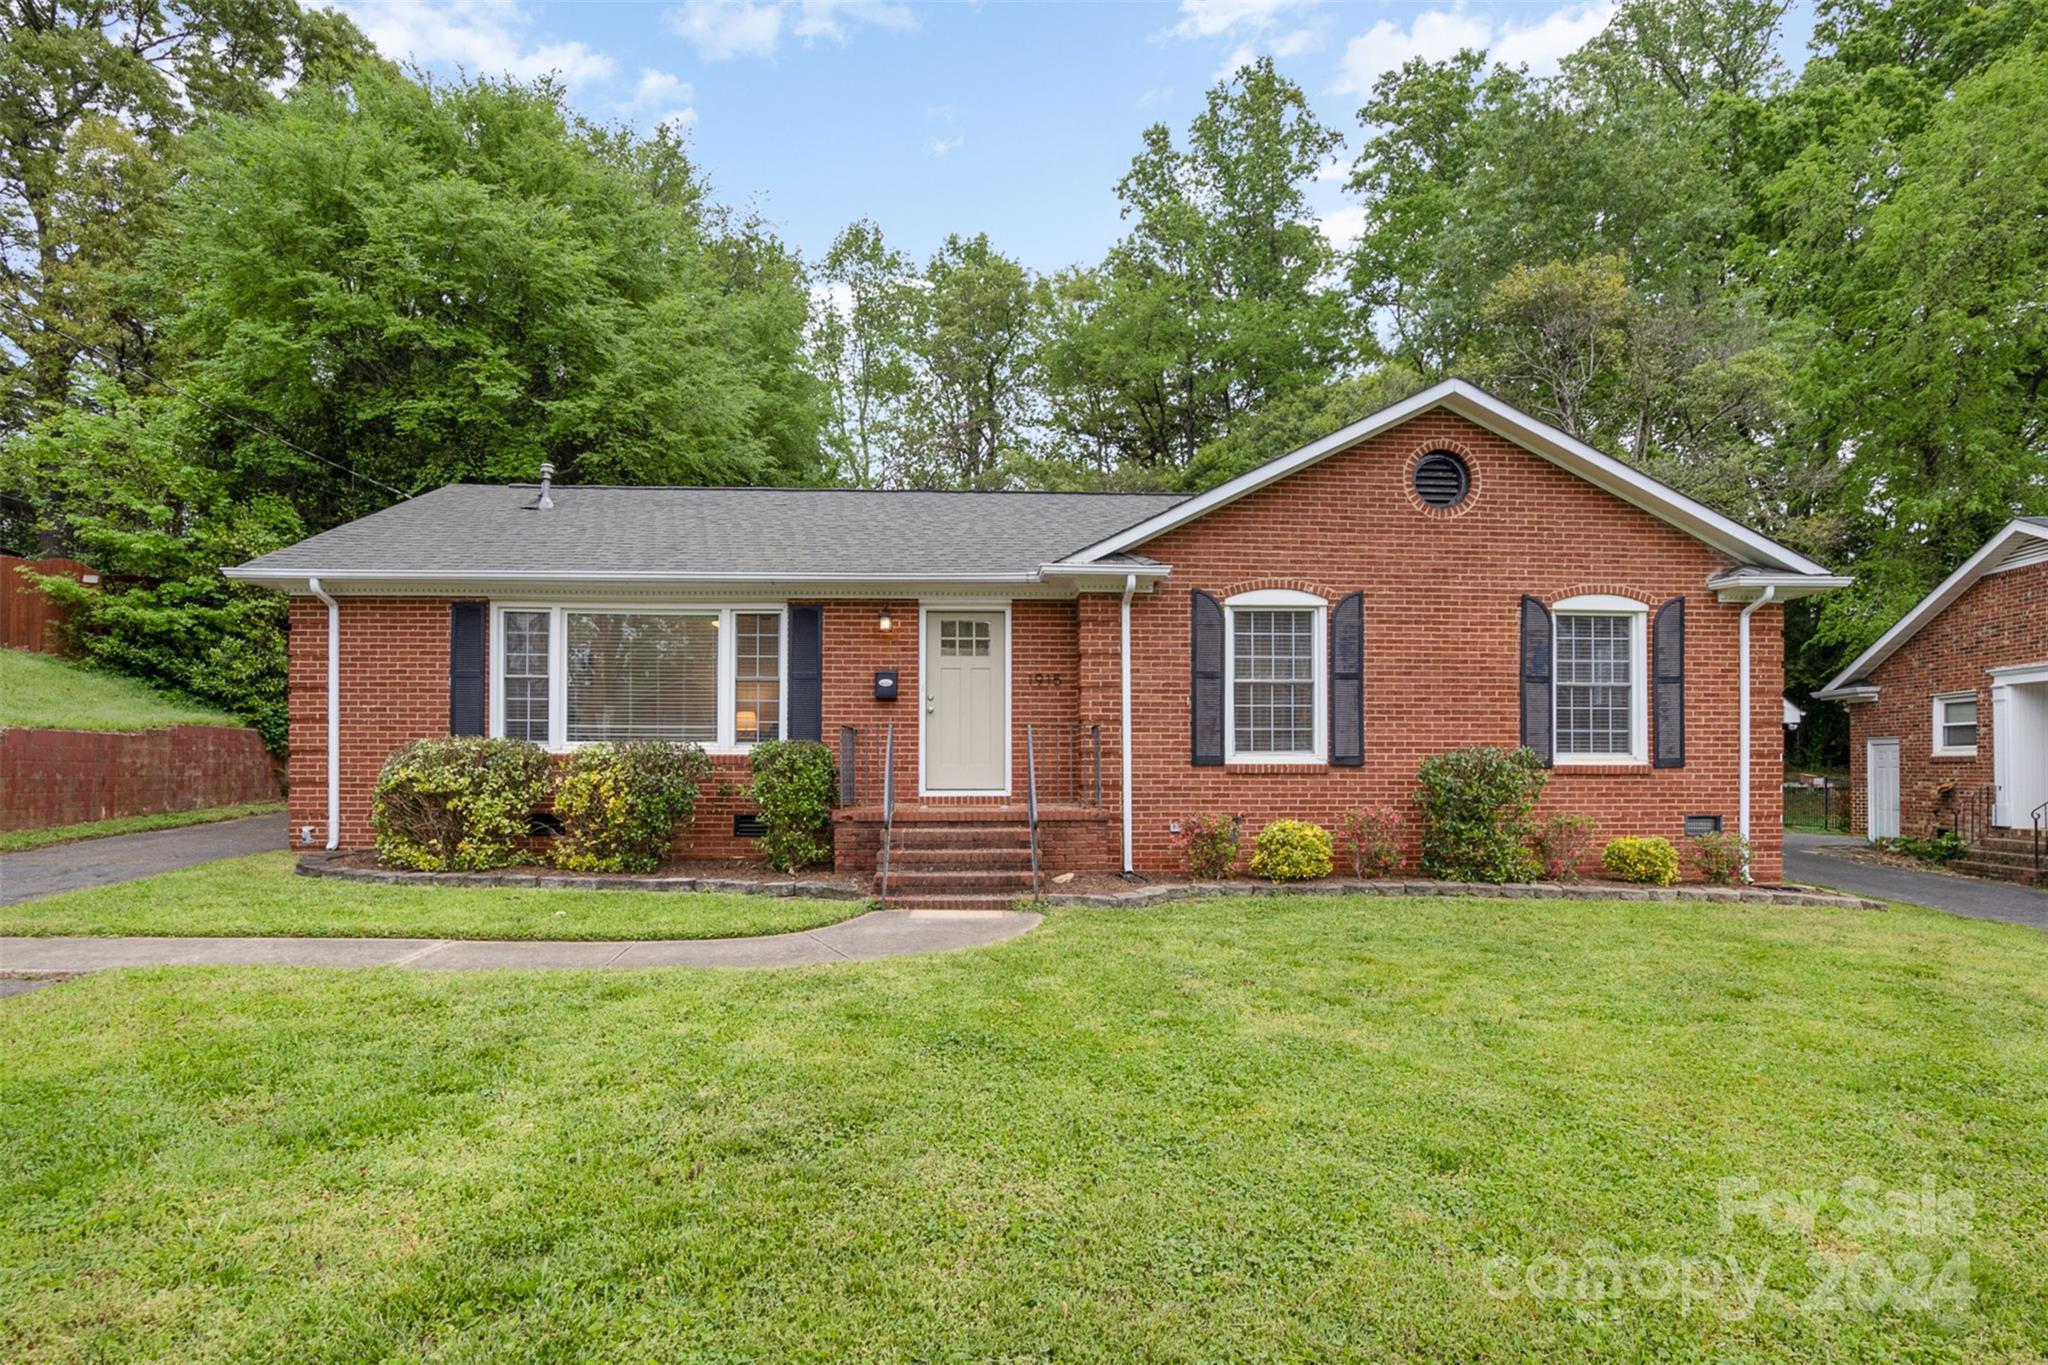 Photo one of 1915 Edgewater Dr Charlotte NC 28210 | MLS 4126764